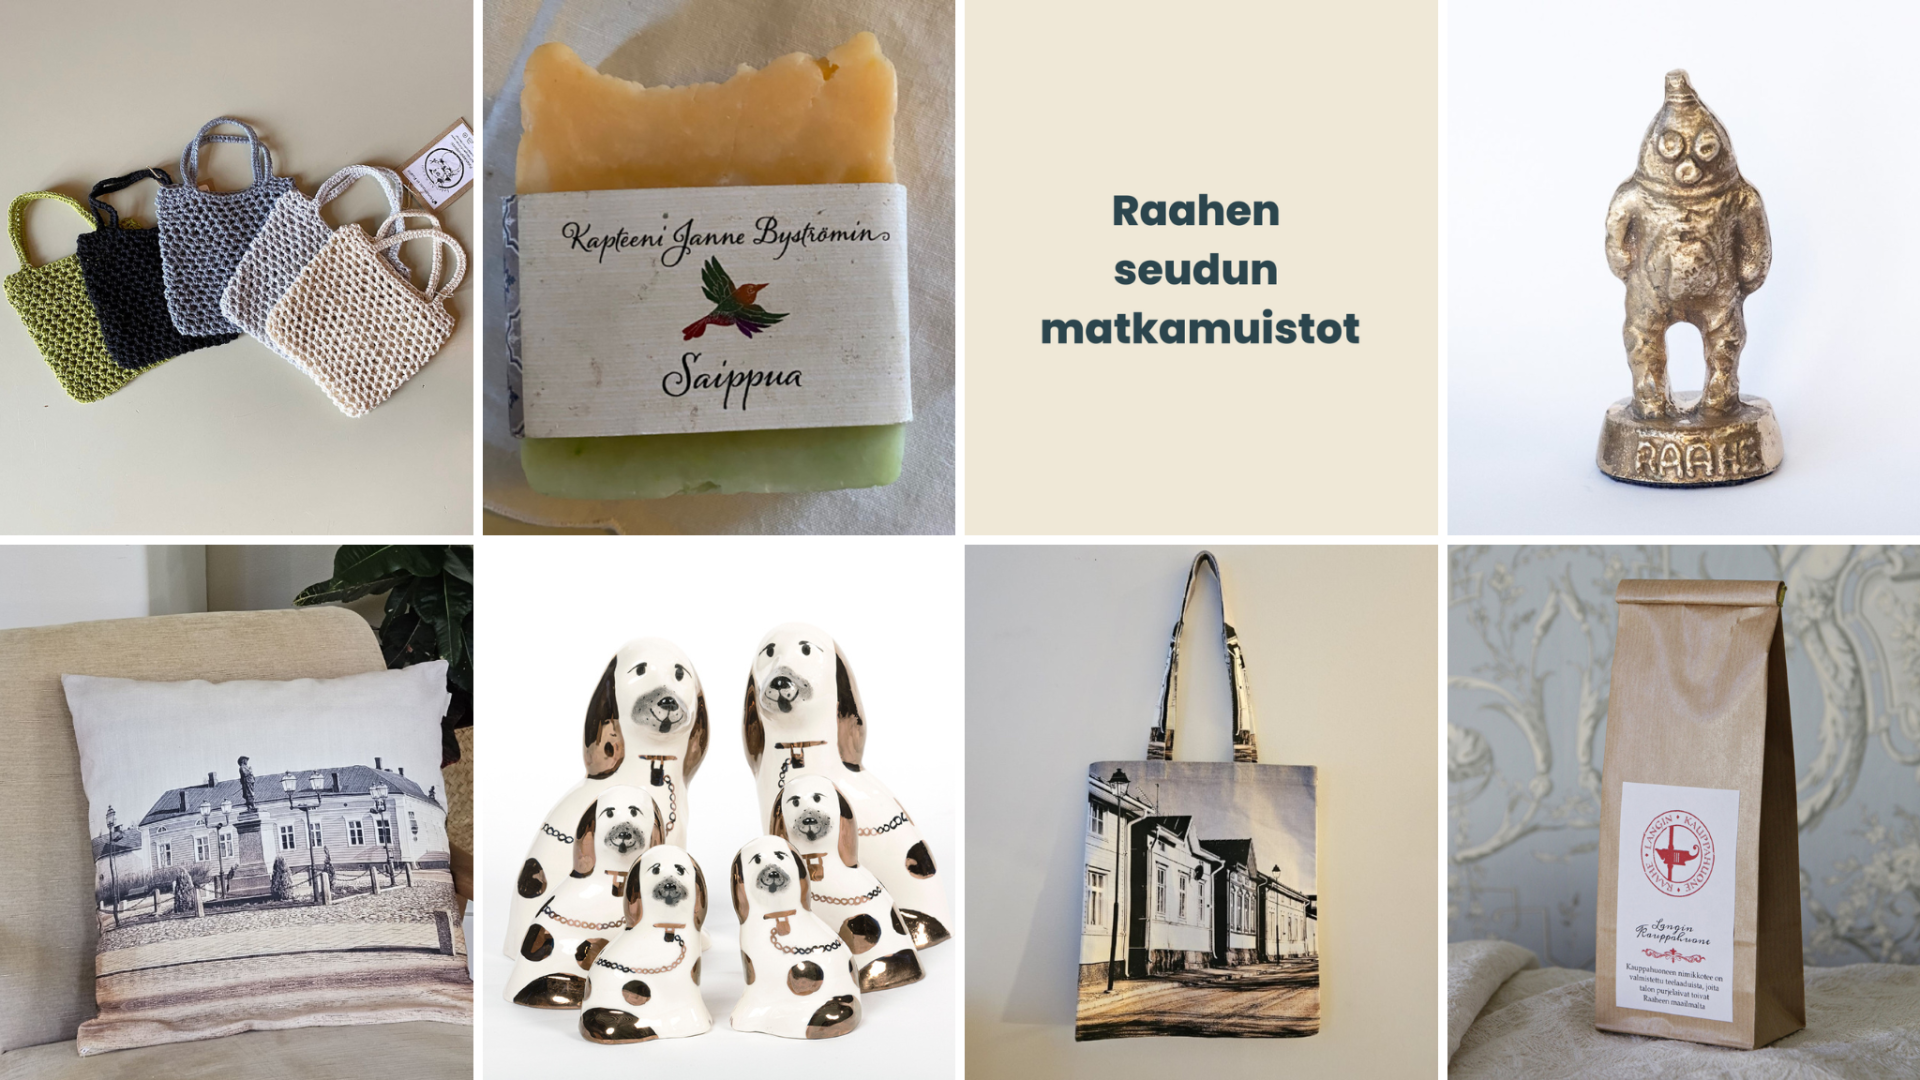 Seven different mementos from the Raahe region